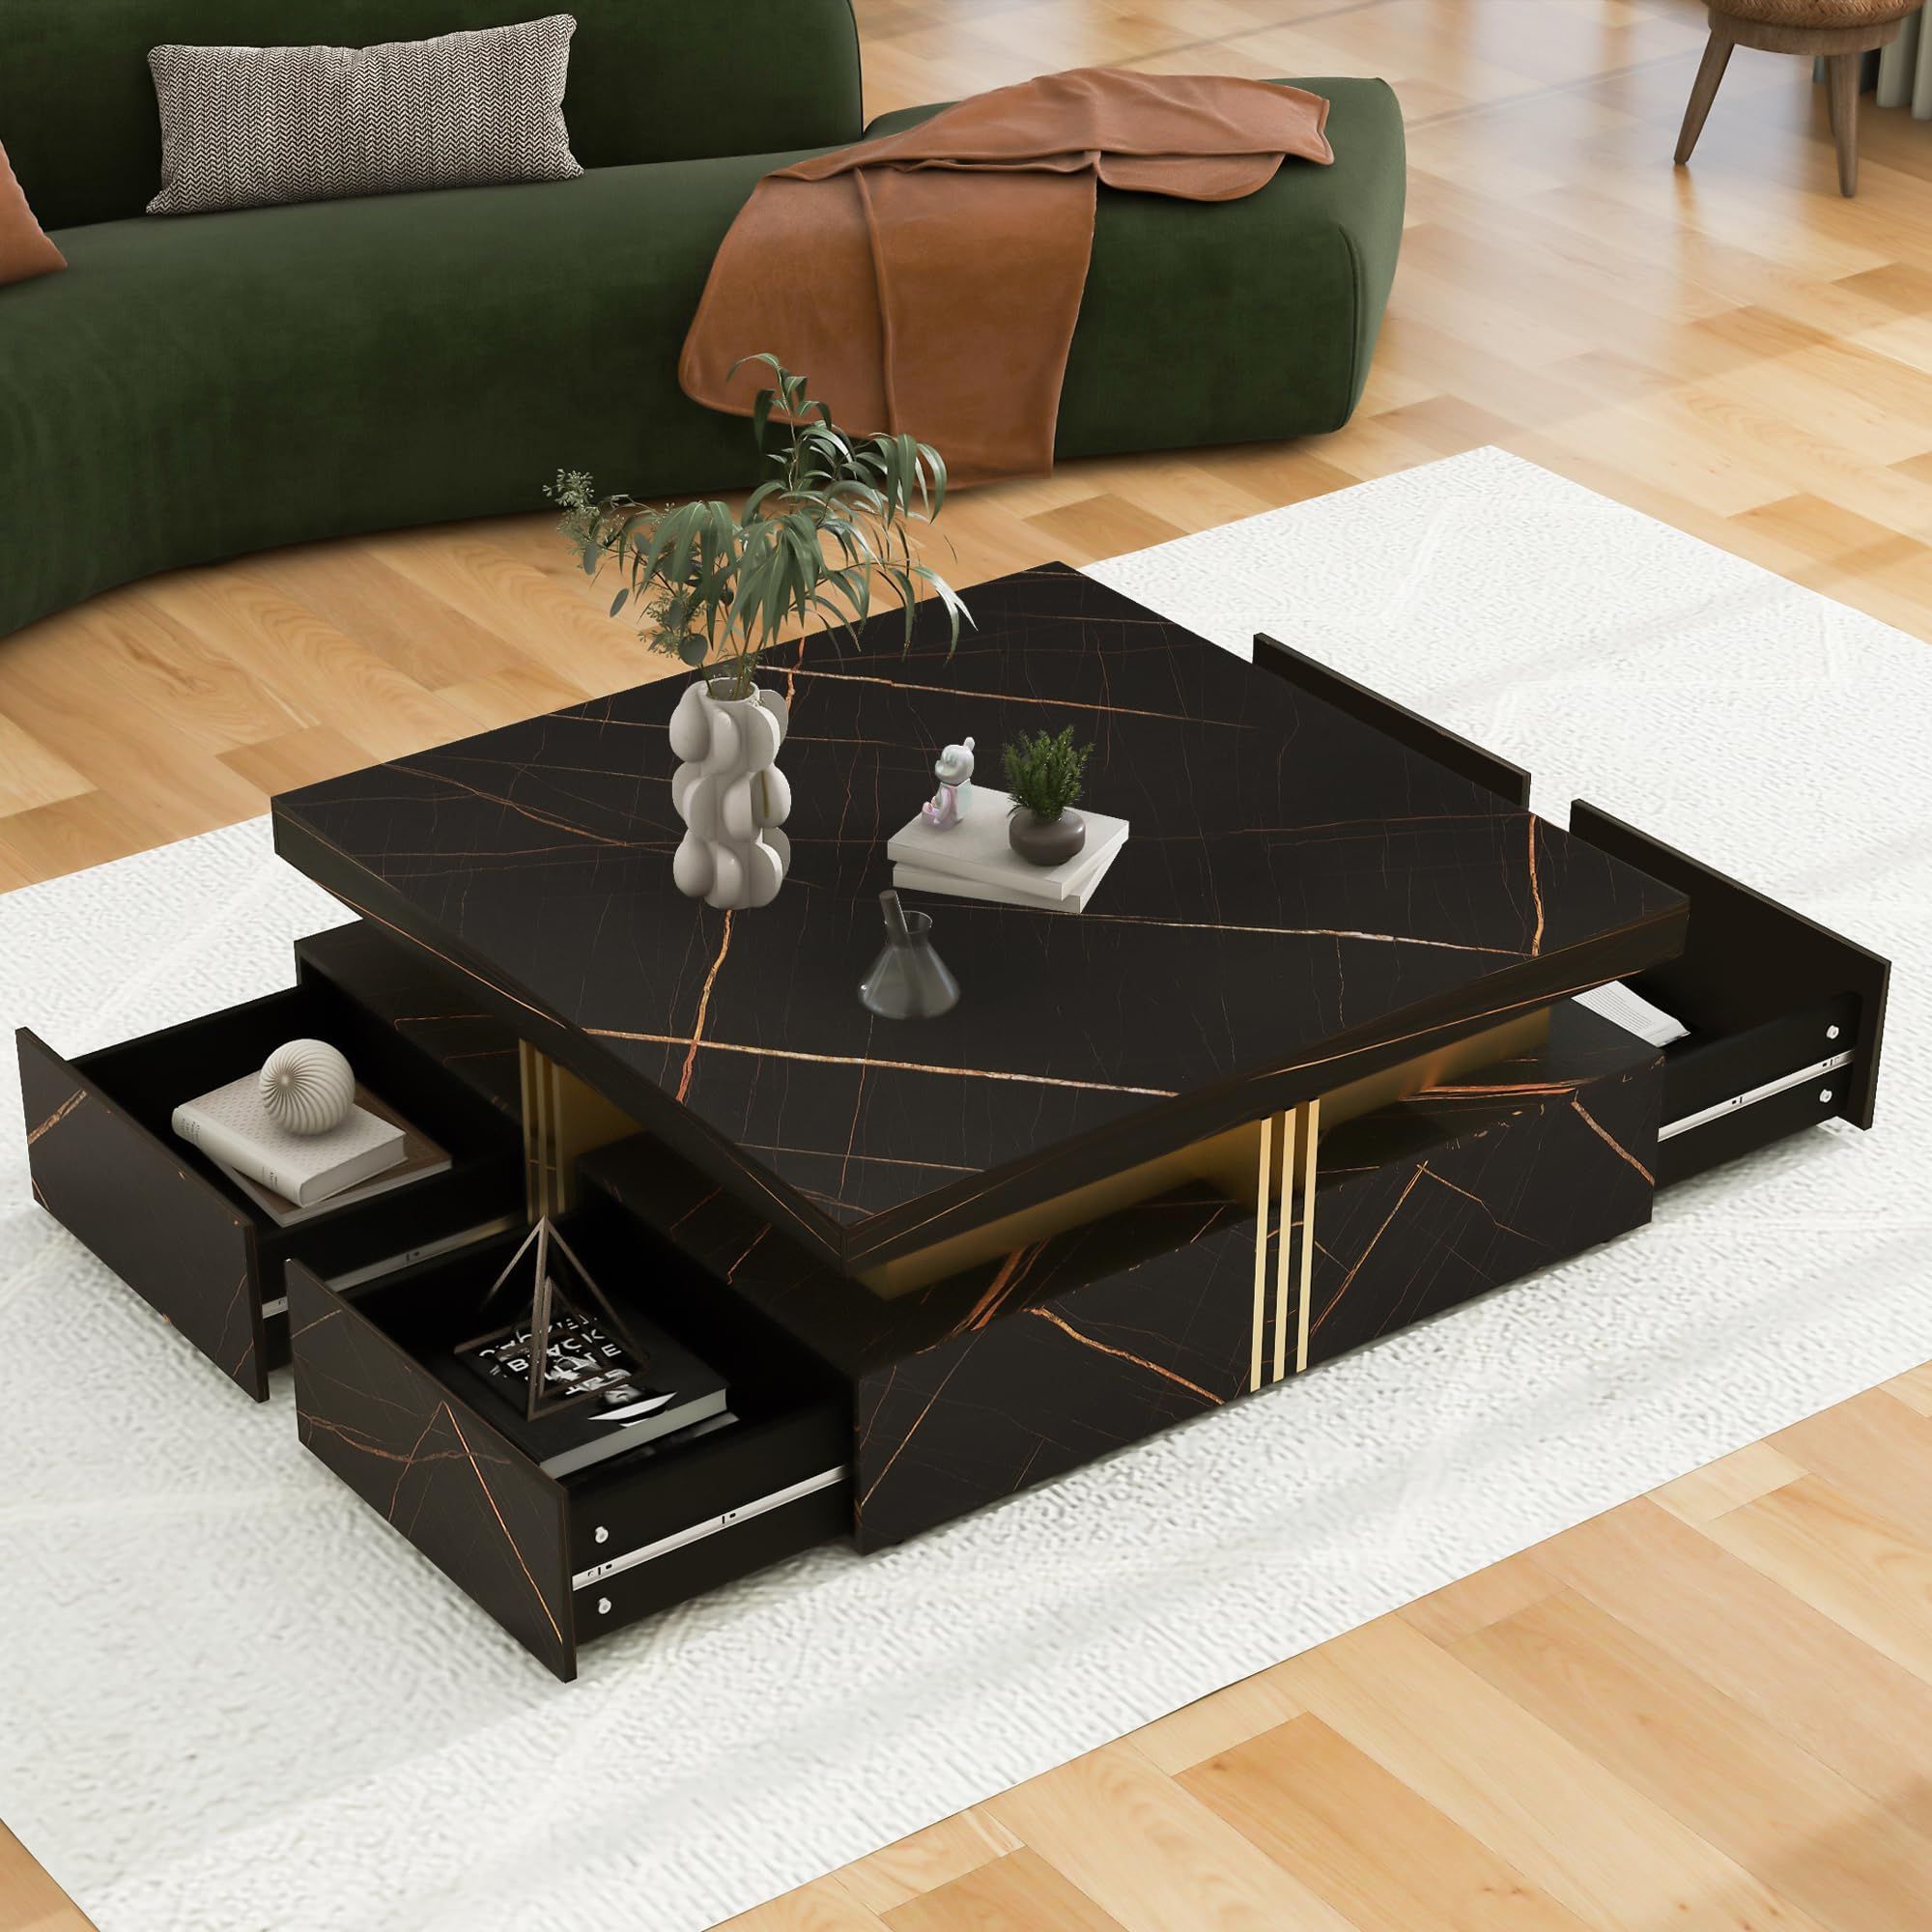 Transitional Square Coffee Tables With Regard To 2020 Amazon: Square Coffee Table With Storage Drawers For Living Room Mid  Century Modern Tea Table Unique Center Table Small Cocktail Tables For  Apartment, Black : Home & Kitchen (View 2 of 10)